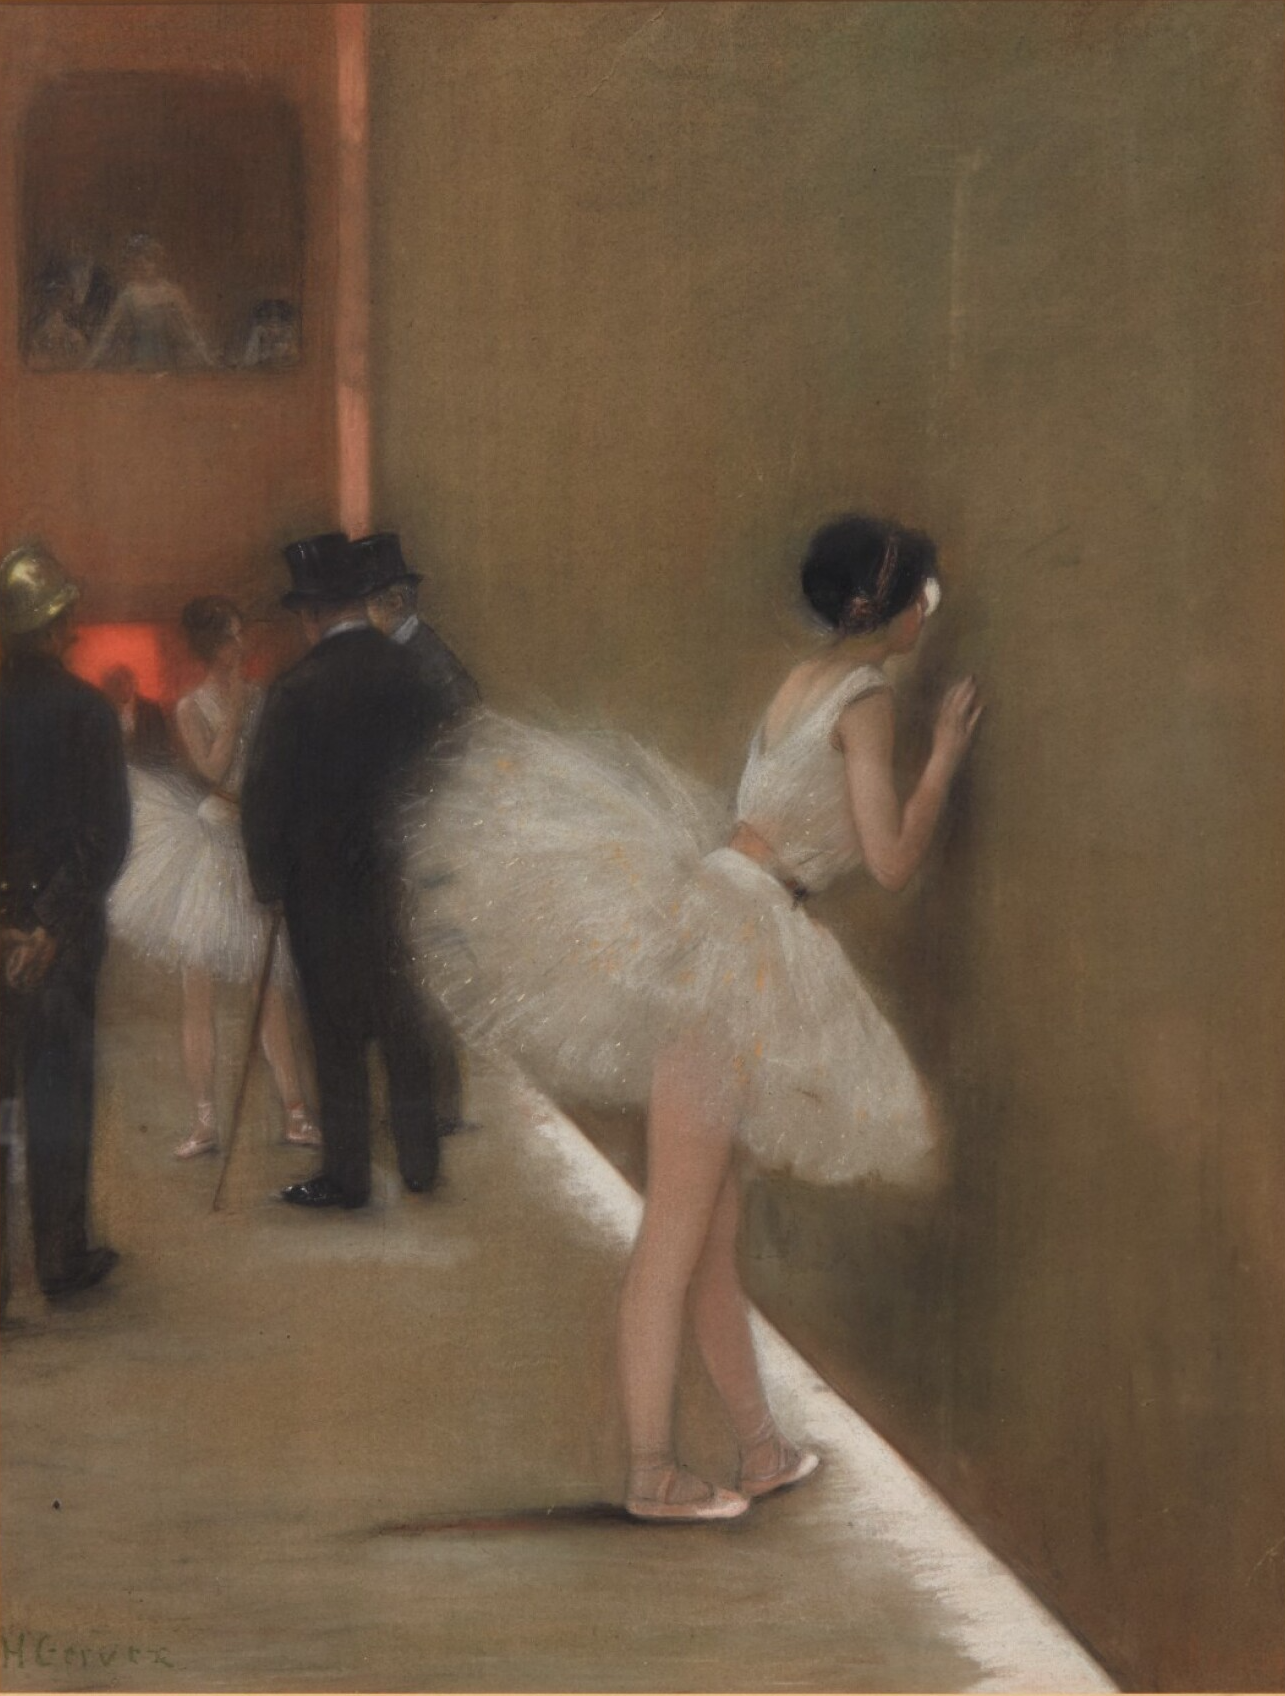 Behind the Curtain at the Ballet by Henri Gervex - c. 1890 - 72 by 59.3 cm private collection